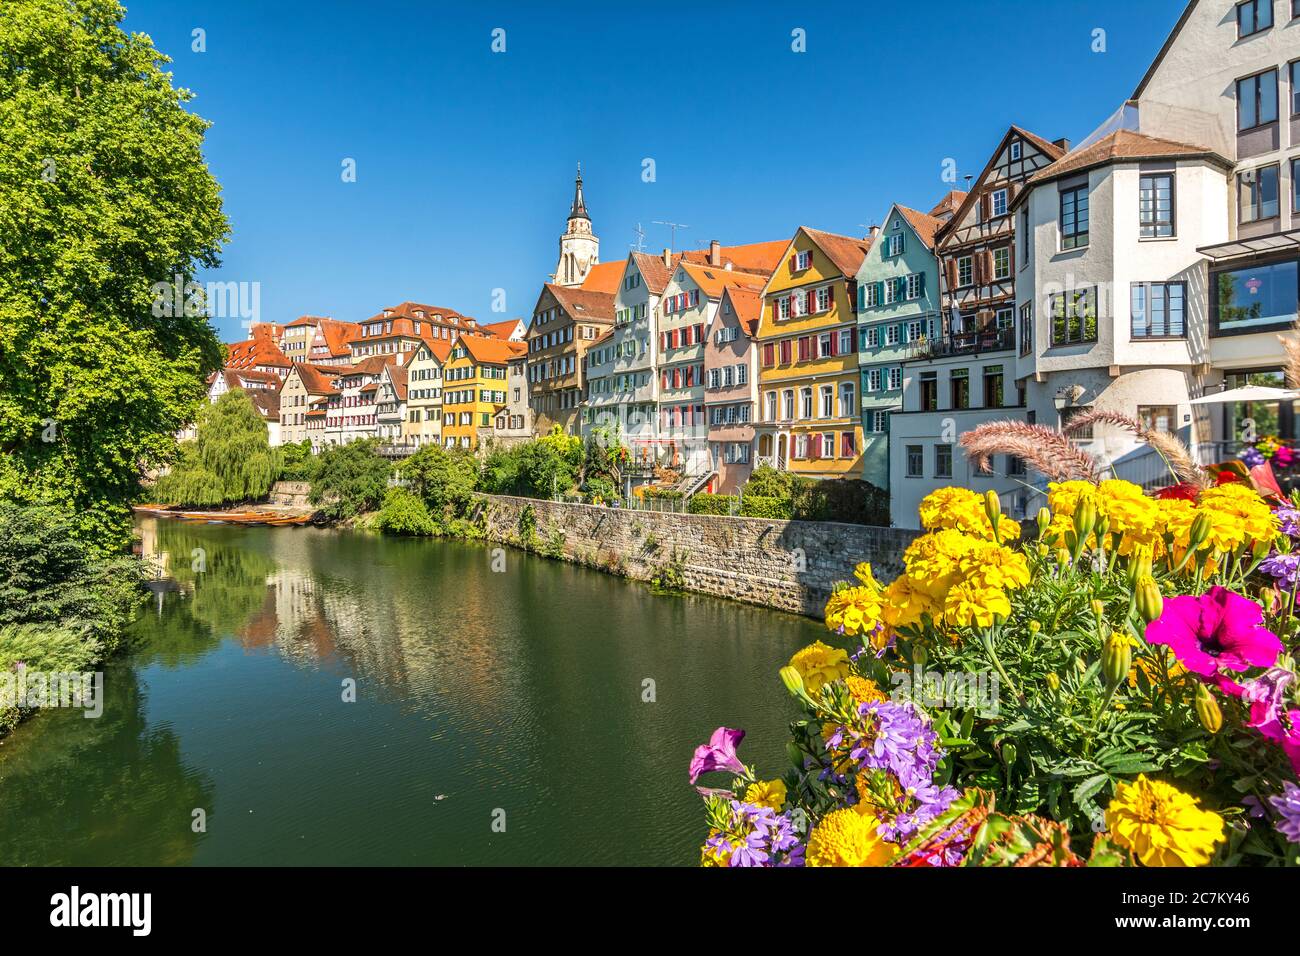 Picturesque old town of the German city of Tübingen with scenic historic houses and colourful flowers on a sunny day in summer Stock Photo